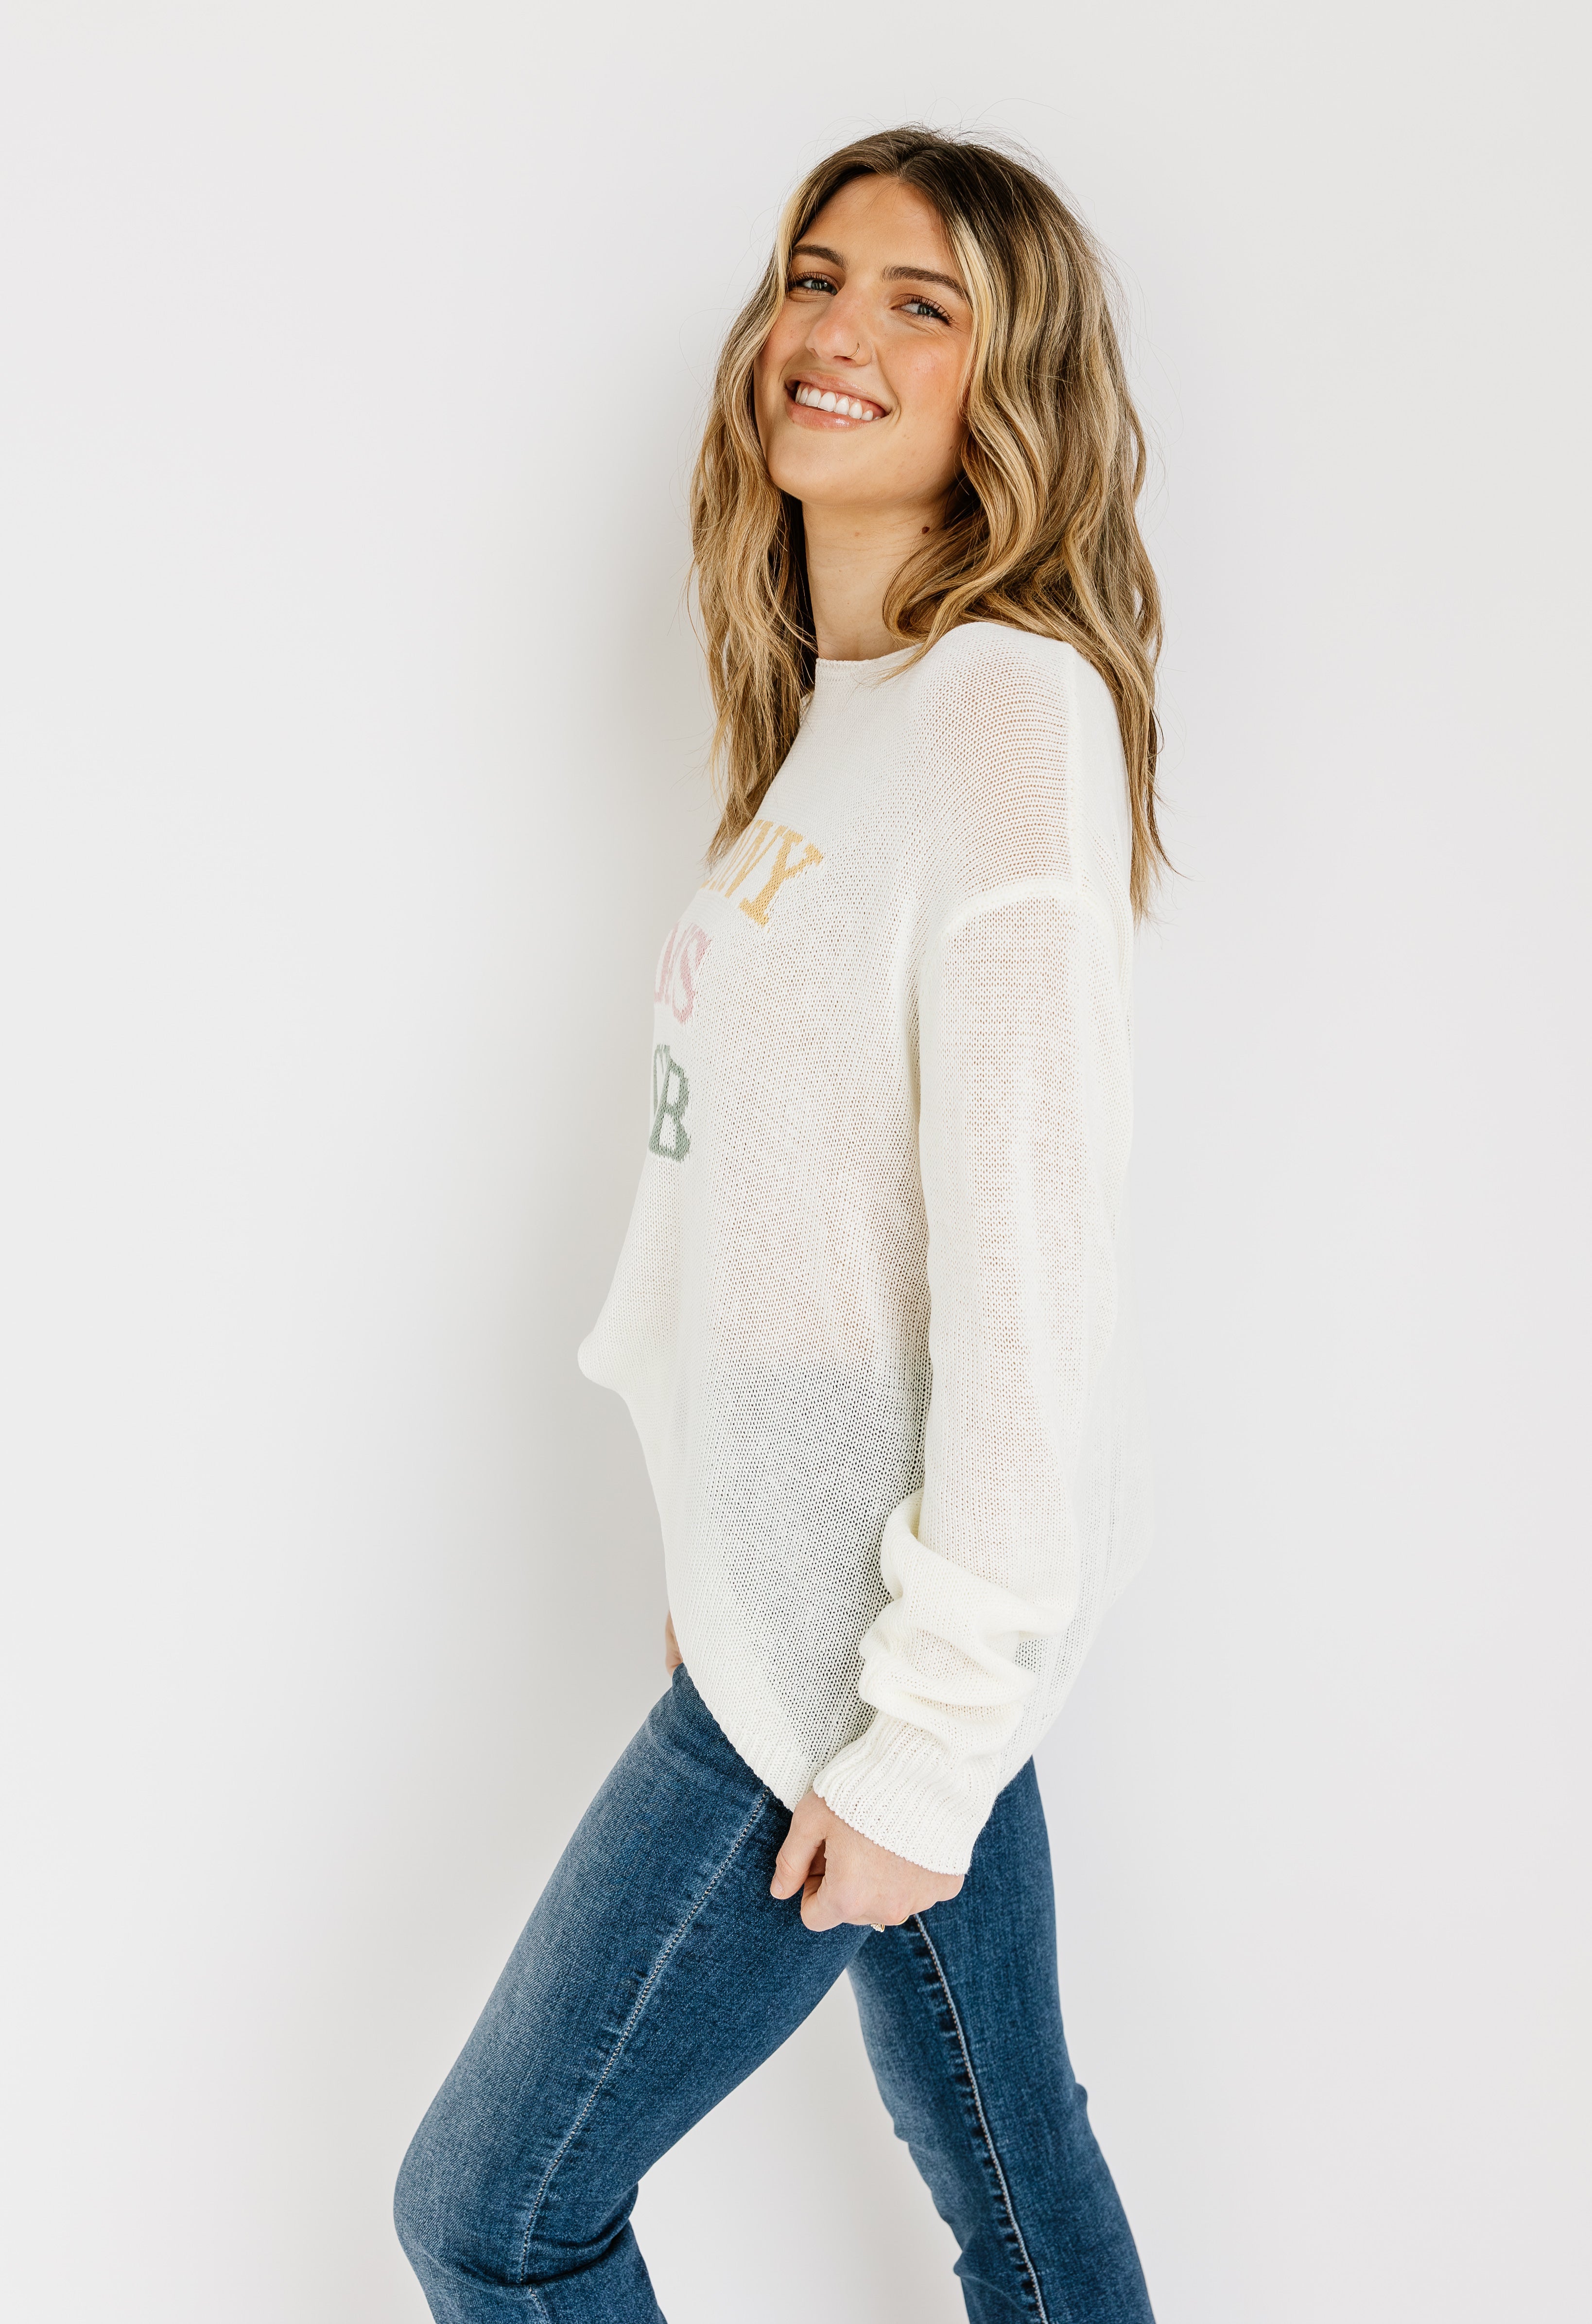 Sunny Days Club Sweater - WHITE - willows clothing SWEATER